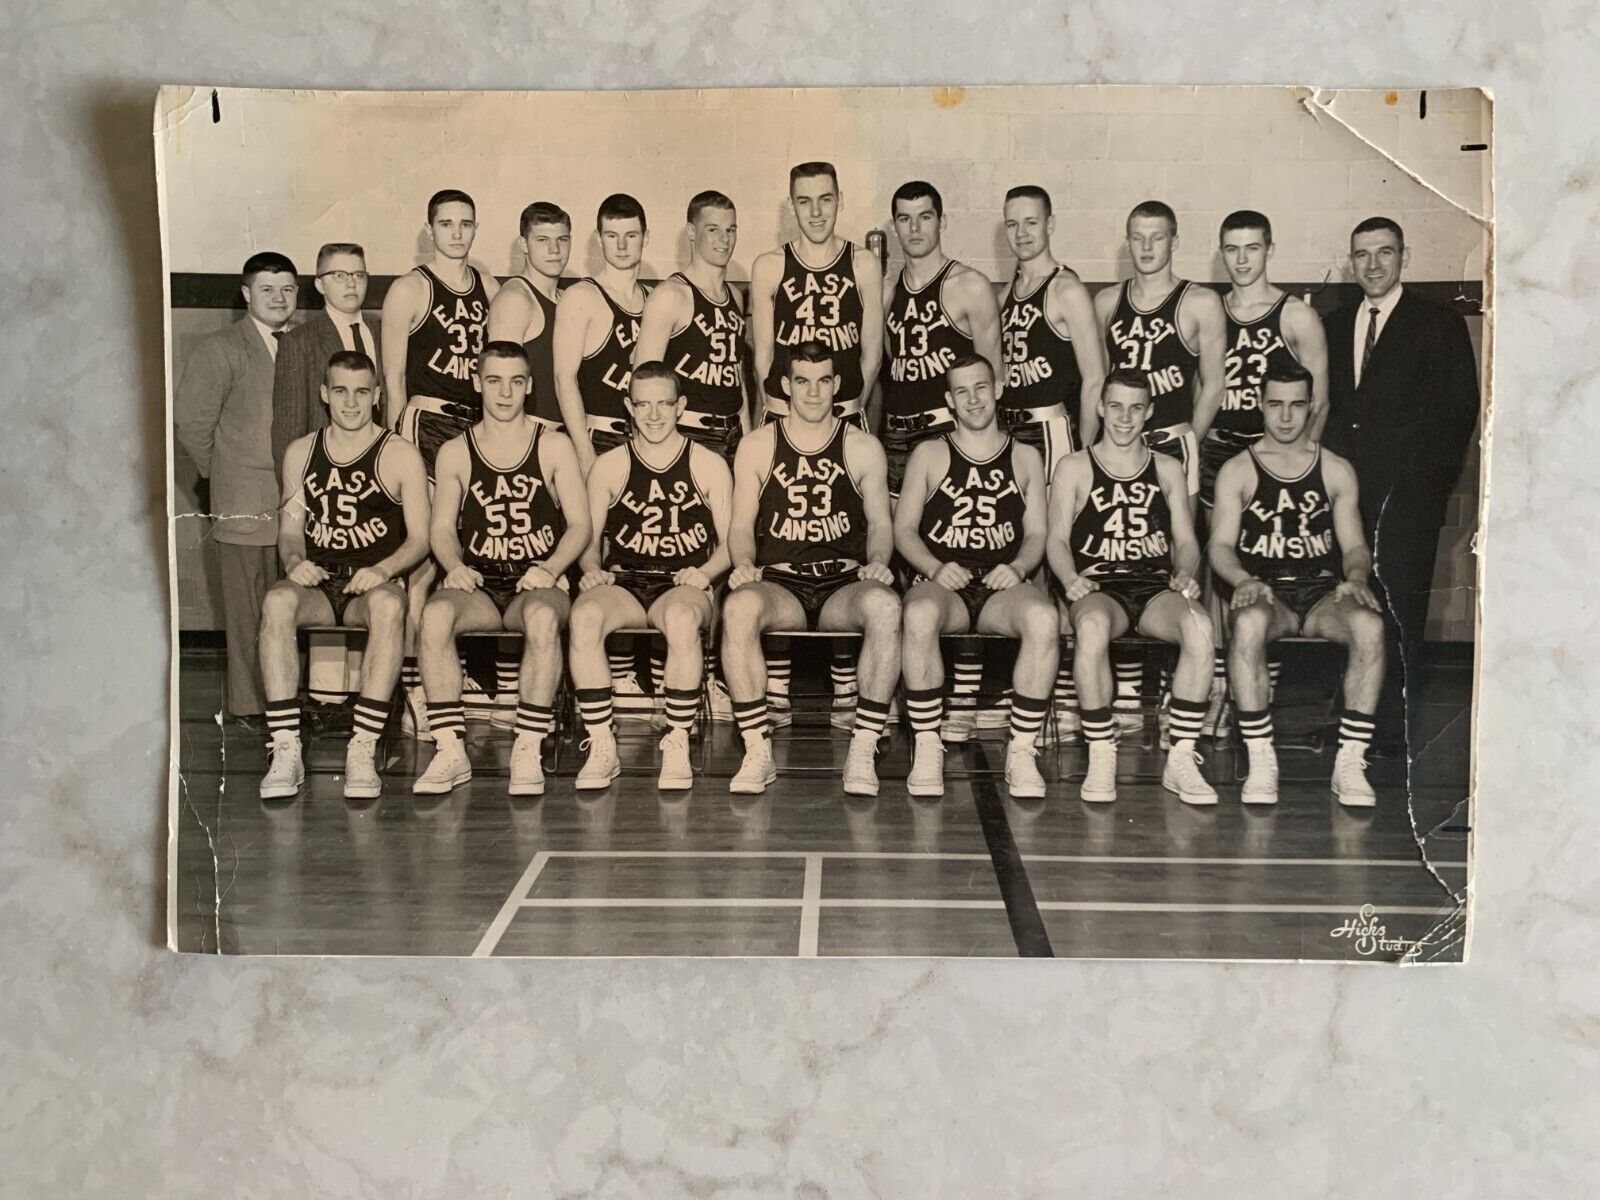 picture - East Lansing (MI) High School boys' basketball team, 1958 state champs